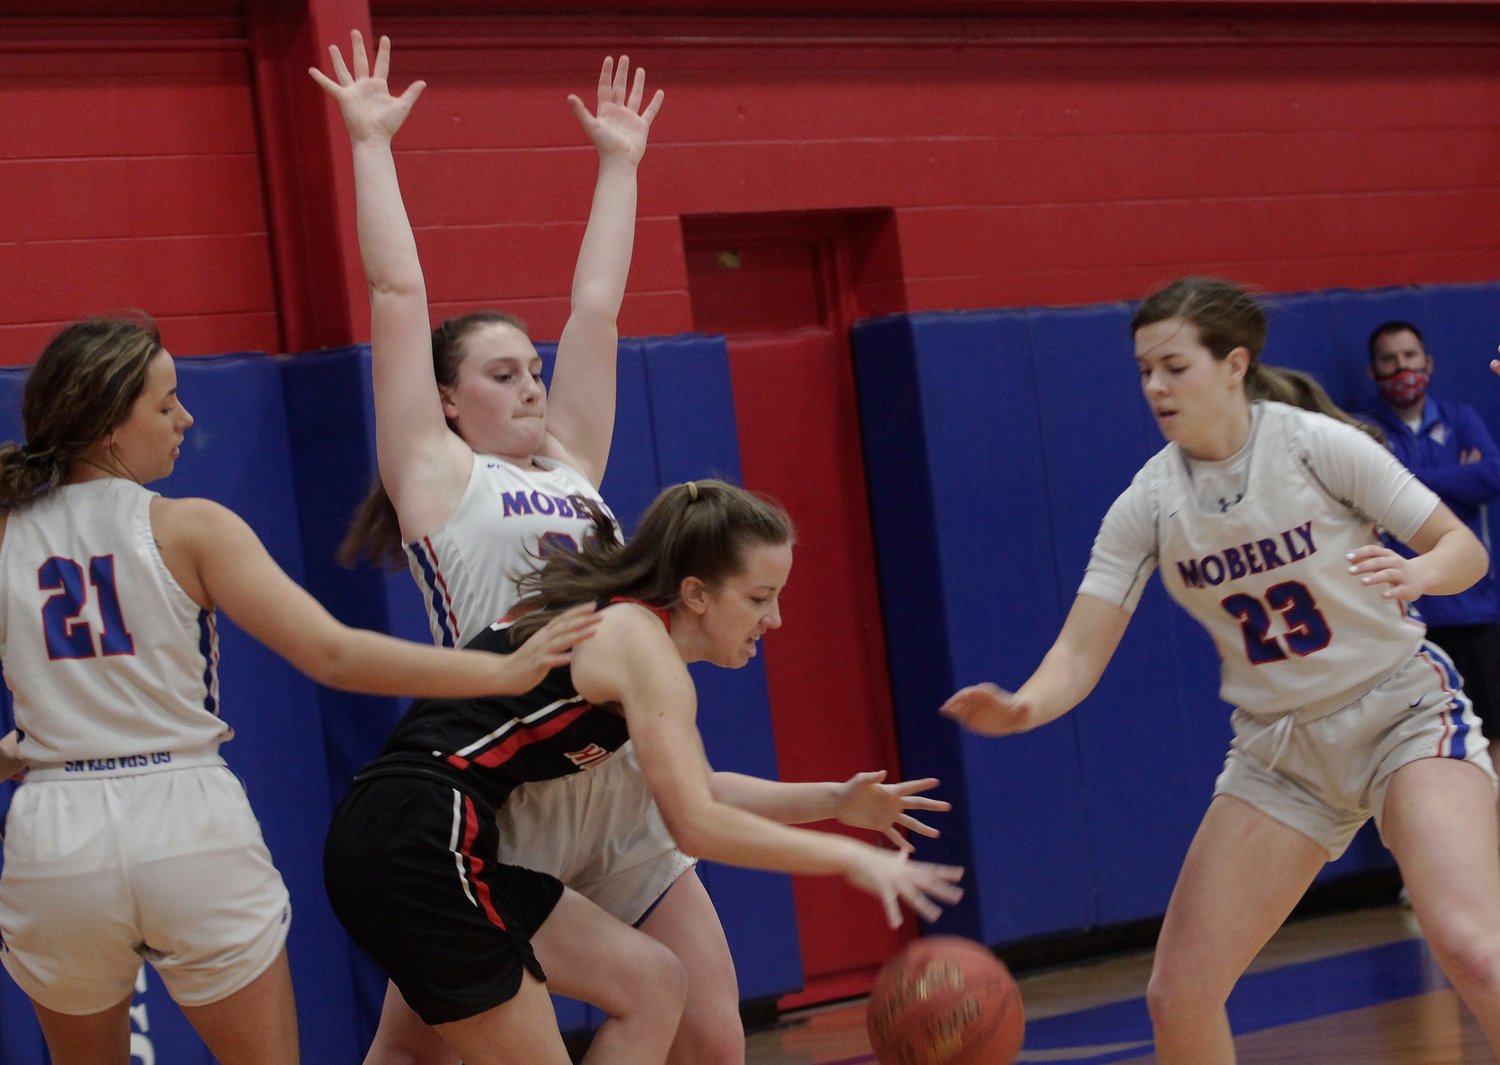 Moberly High School junior Alaina Link raises her arms as she stops the dribble penetration of Hannibal senior Ellie Locke during Saturday afternoon's Class 5 District 15 Tournament opening game. Moving in to assist Link are sophomore Kennedy Messer (#23) and senior Sam Calvert (#21). The Moberly trio helped the fourth-seed Lady Spartans knock off Hannibal 59-39 at home to advance to Monday's 6 p.m. semifinal where they battle top-seed Mexico at the Bulldogs home court.